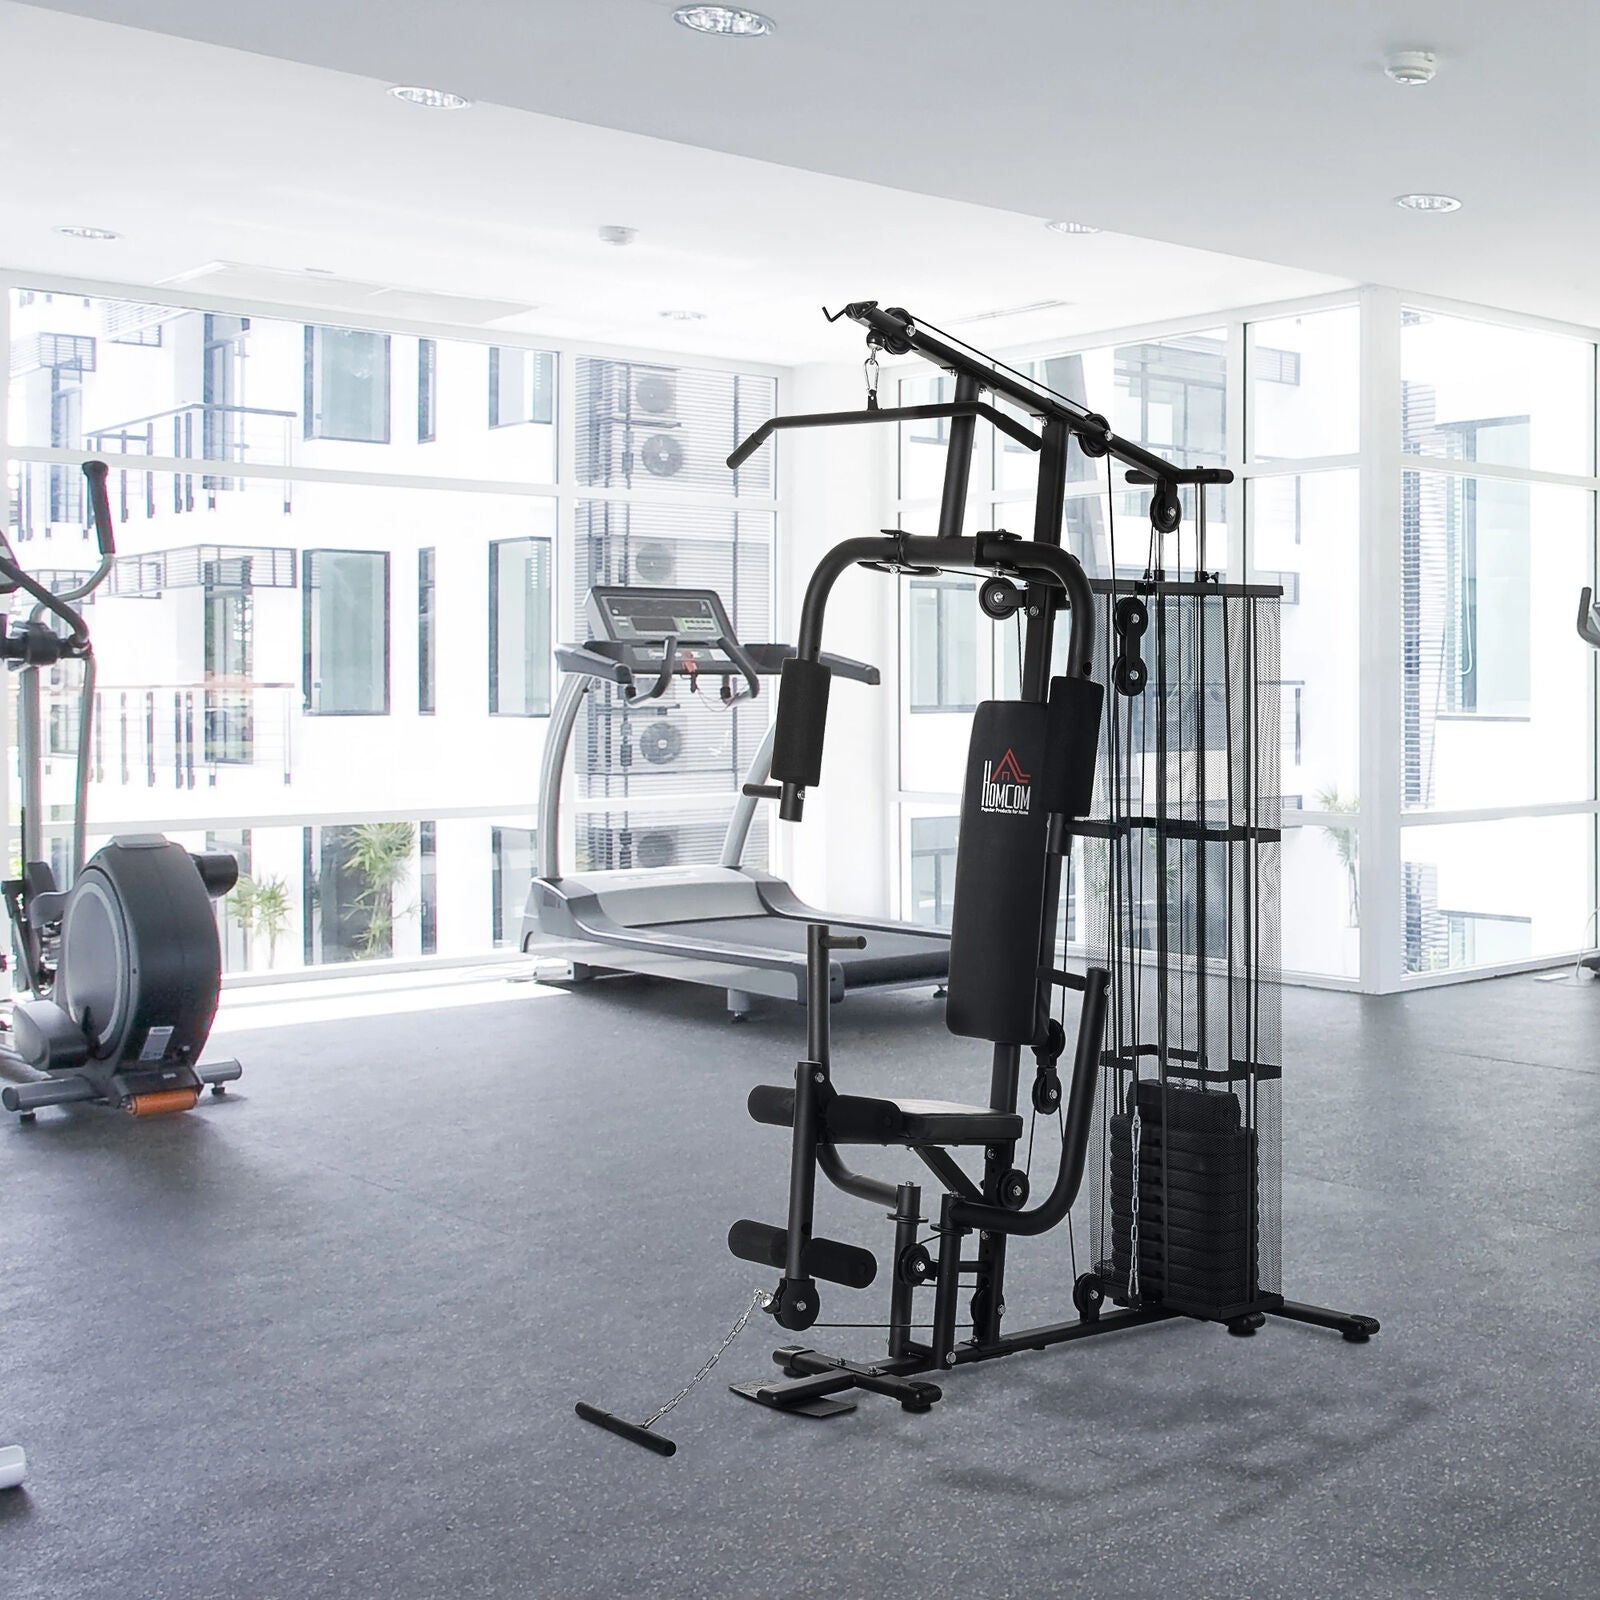 Gym Equipment at Home